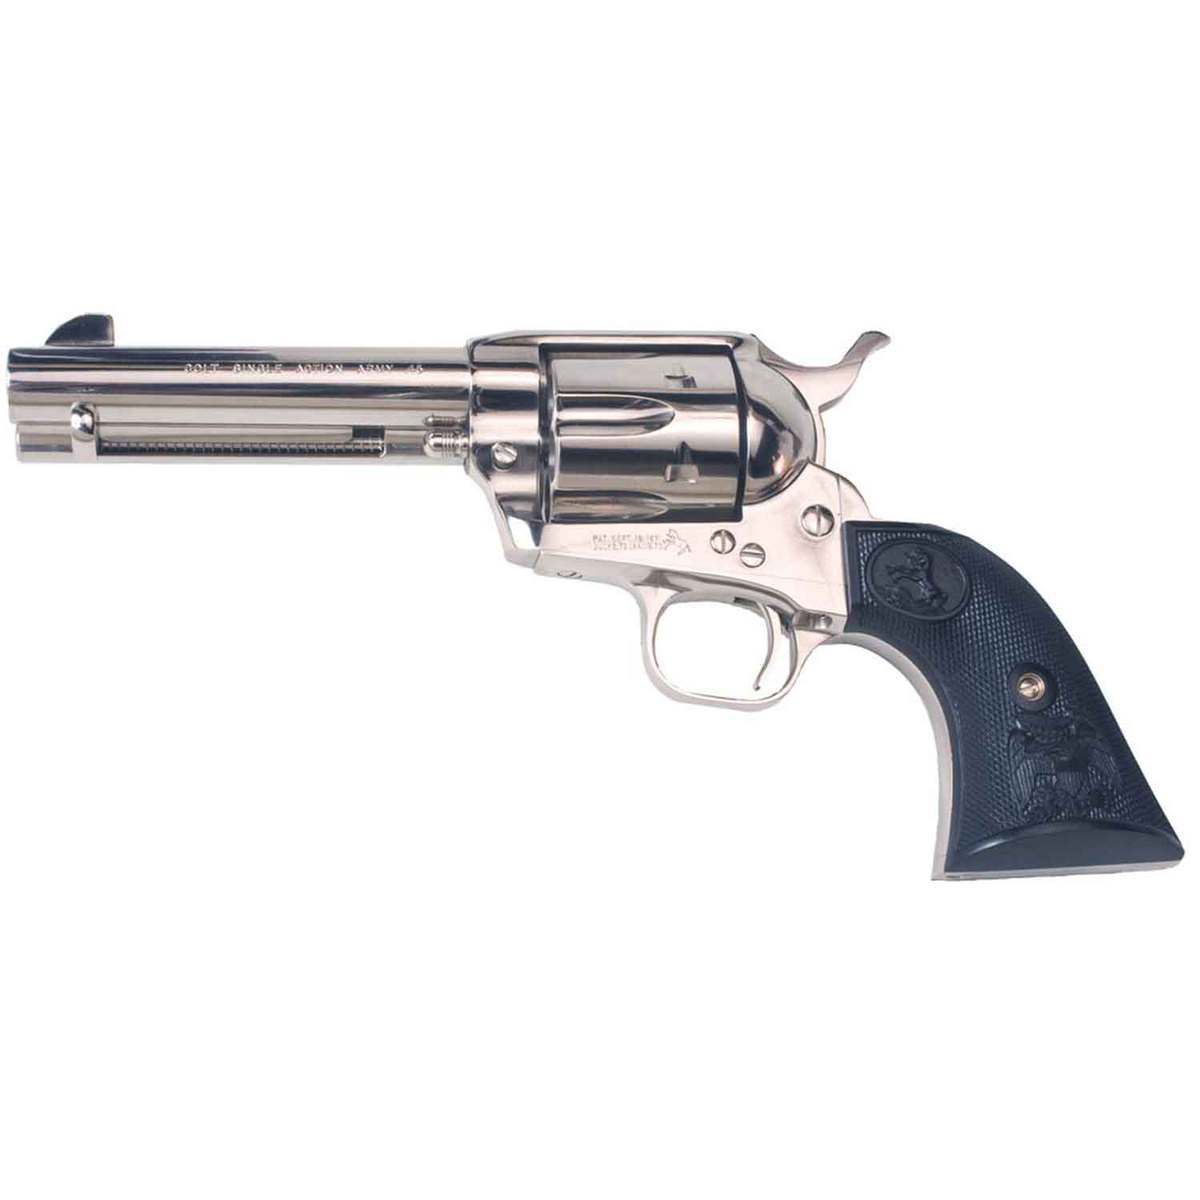 Buy Colt Single Action Army Peacemaker 357 Magnum 4.75in Nickel Revolver - 6 Rounds Online